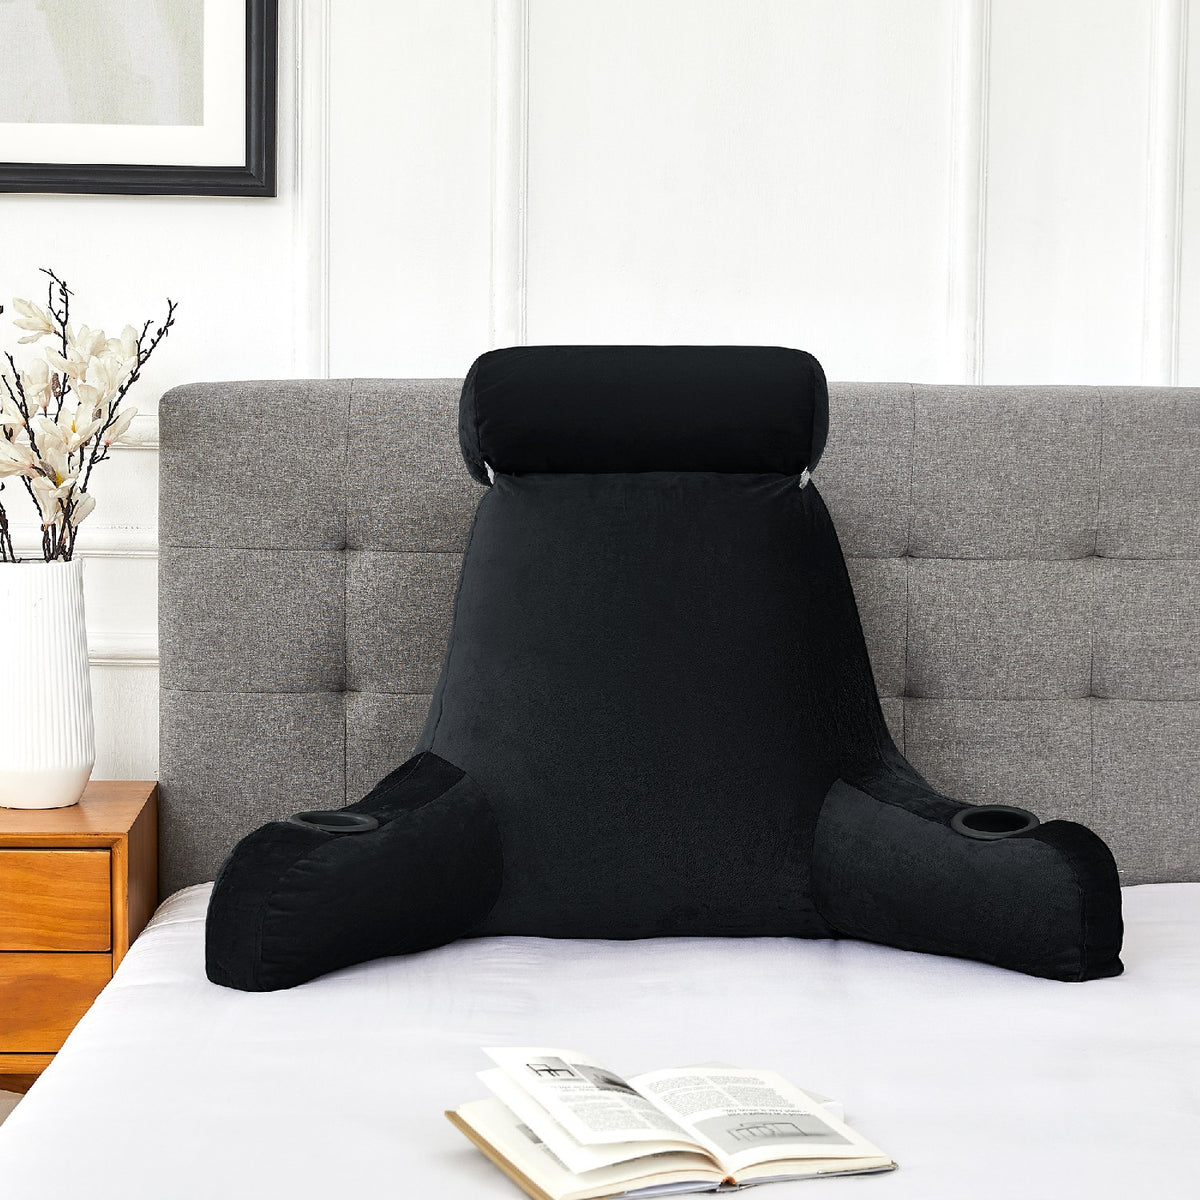 Bed Rest Pillow with Cup Holders